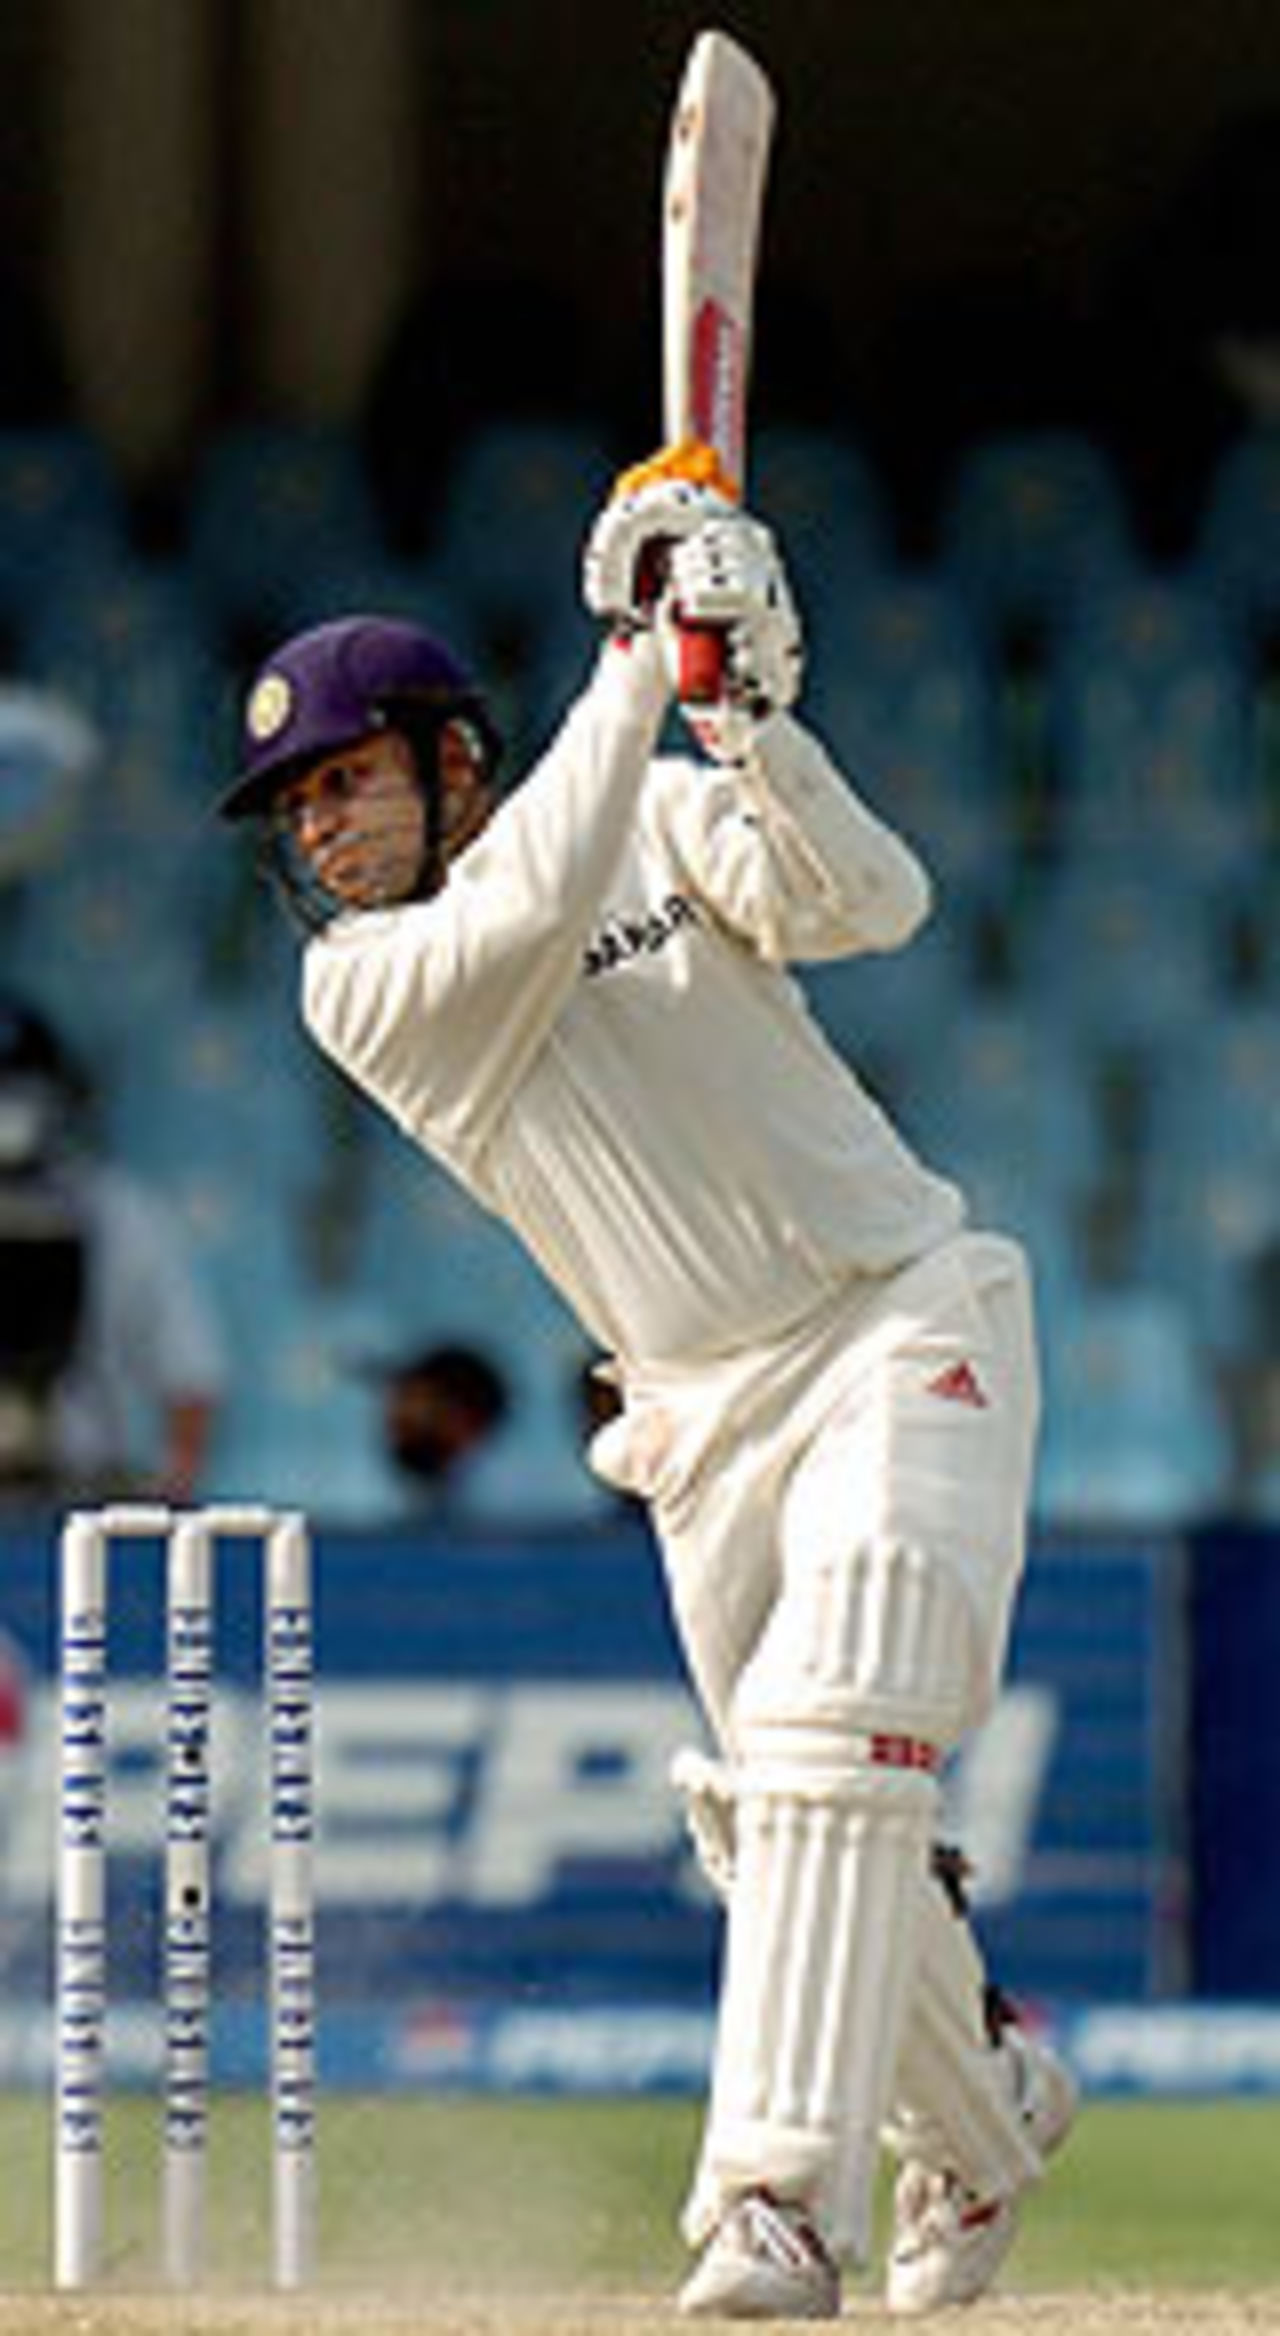 Standing alone, Virender Sehwag hits out, Pakistan v India, 2nd Test, Lahore, 3rd day, April 7, 2004